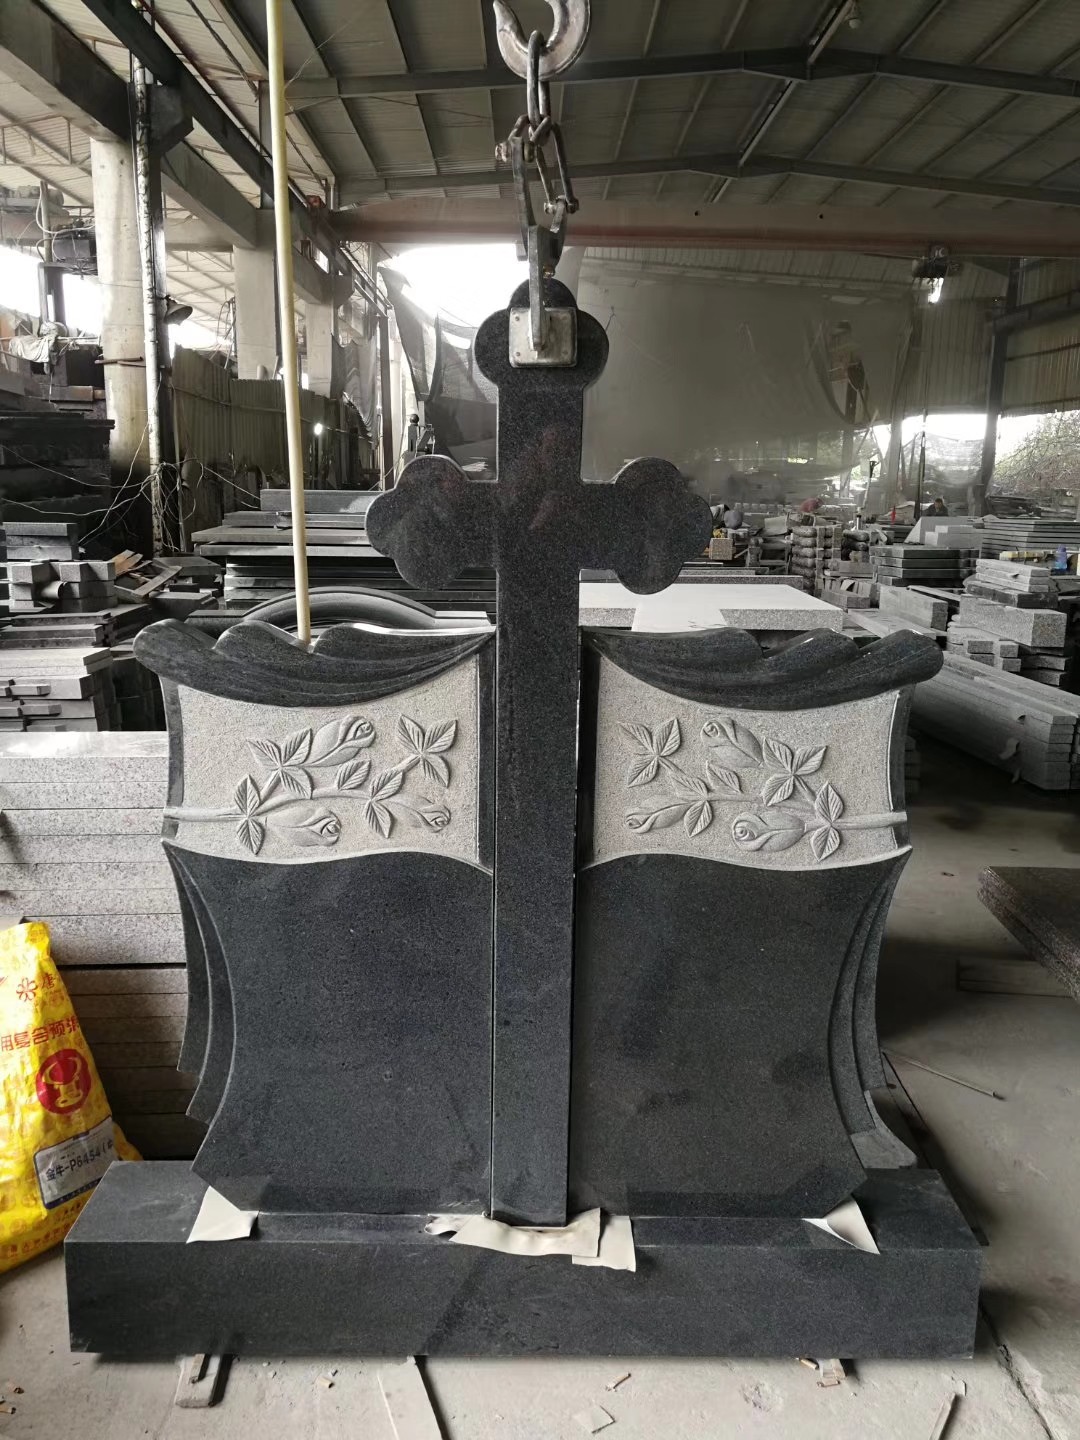 Engraved Gravestone Western Style Double Monument Tombstone